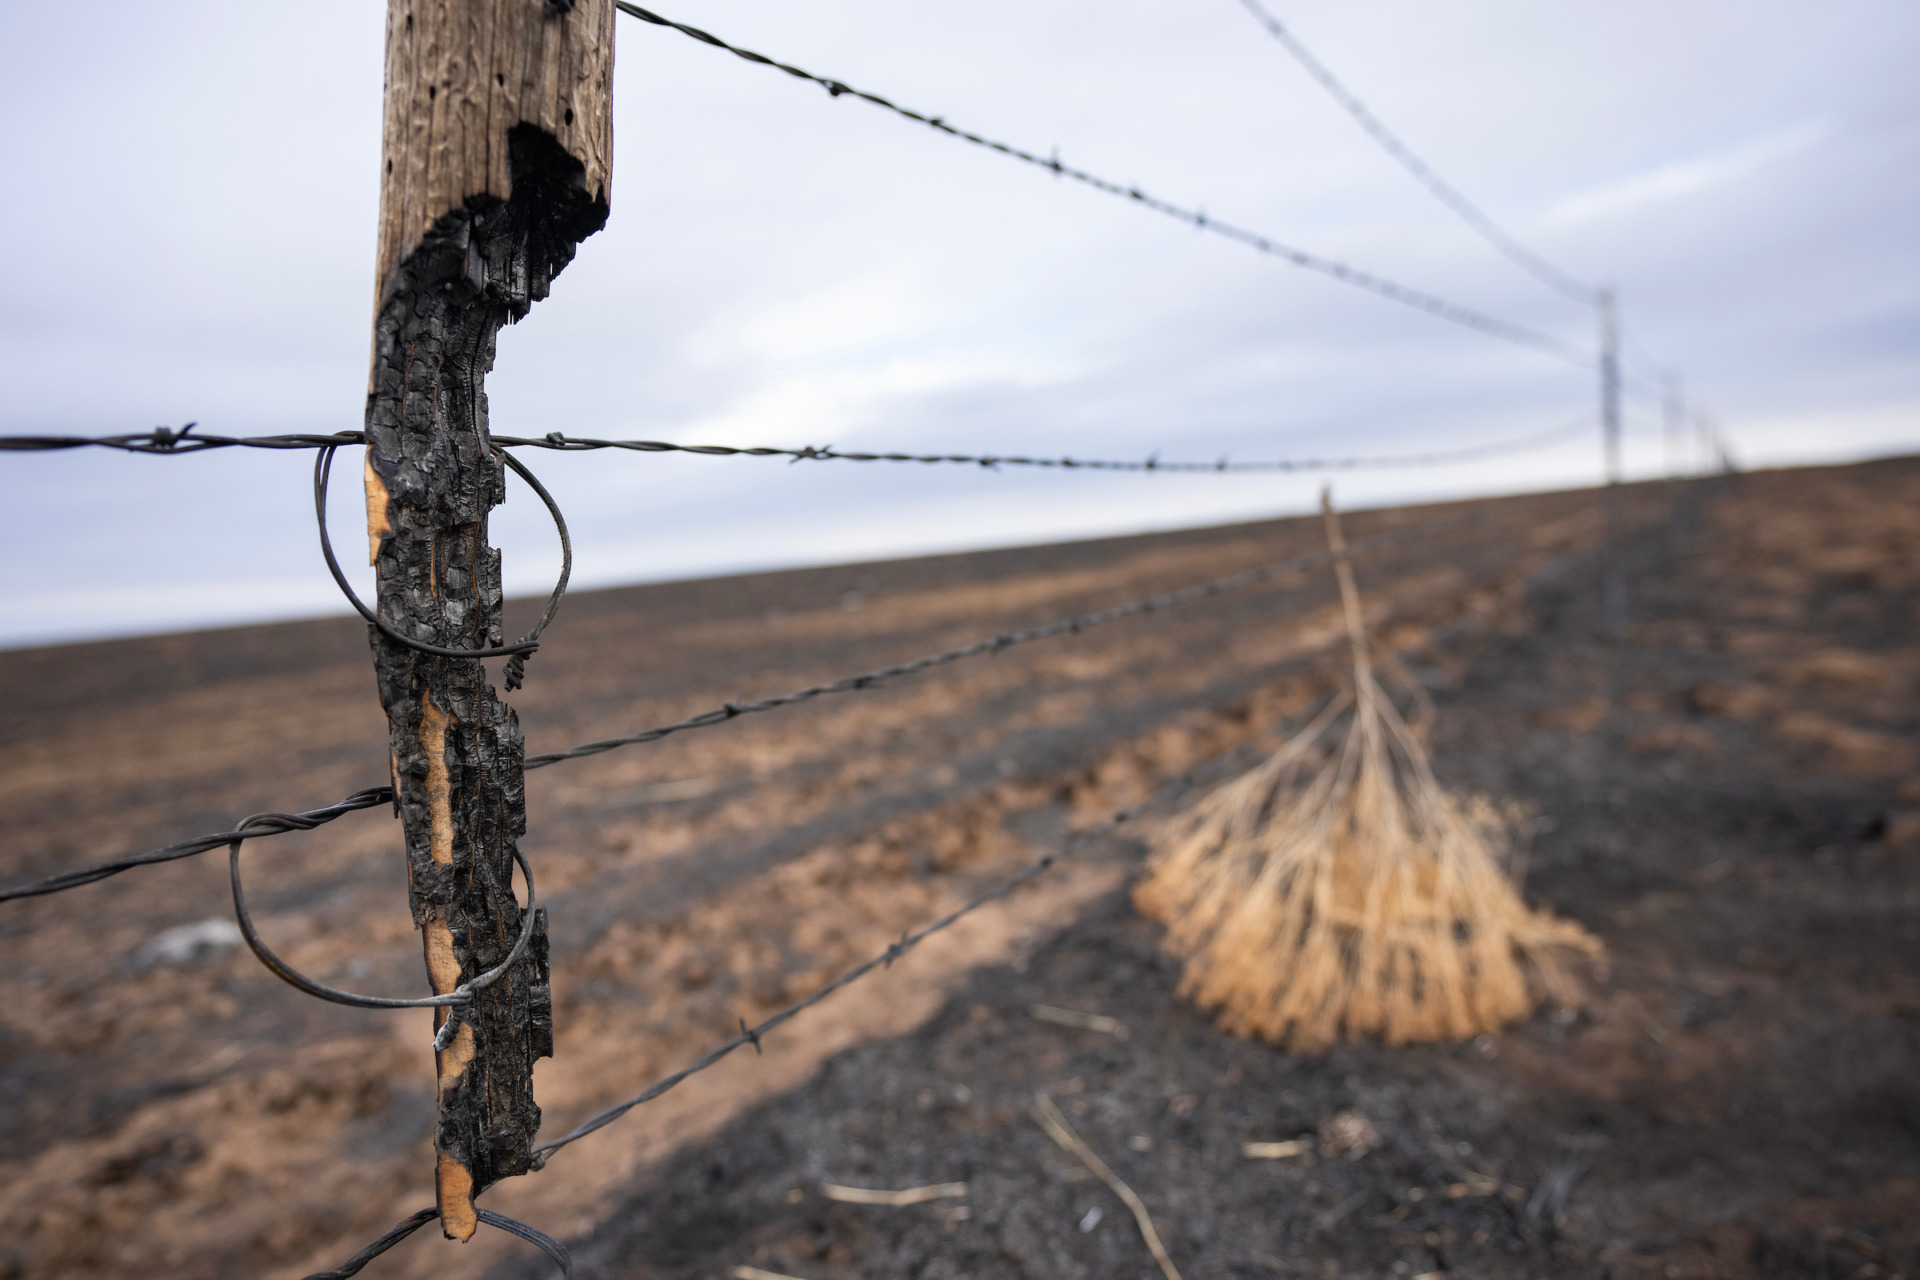 Replacing thousands of miles of burned fences - AgriLife Today